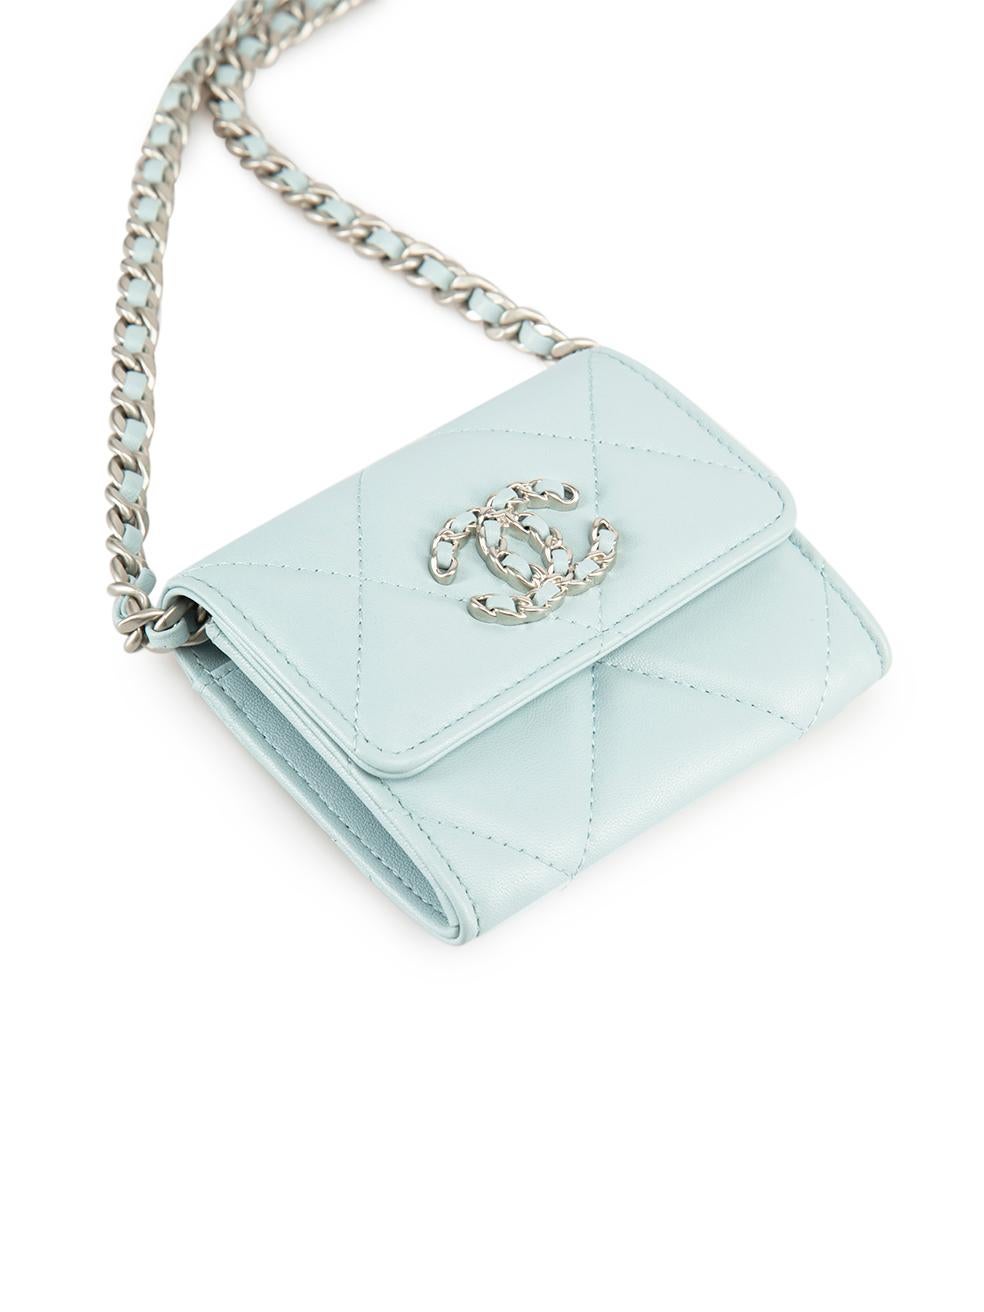 Chanel Blue Leather Chanel 19 Mini Chain Cardholder Wallet For Sale 3